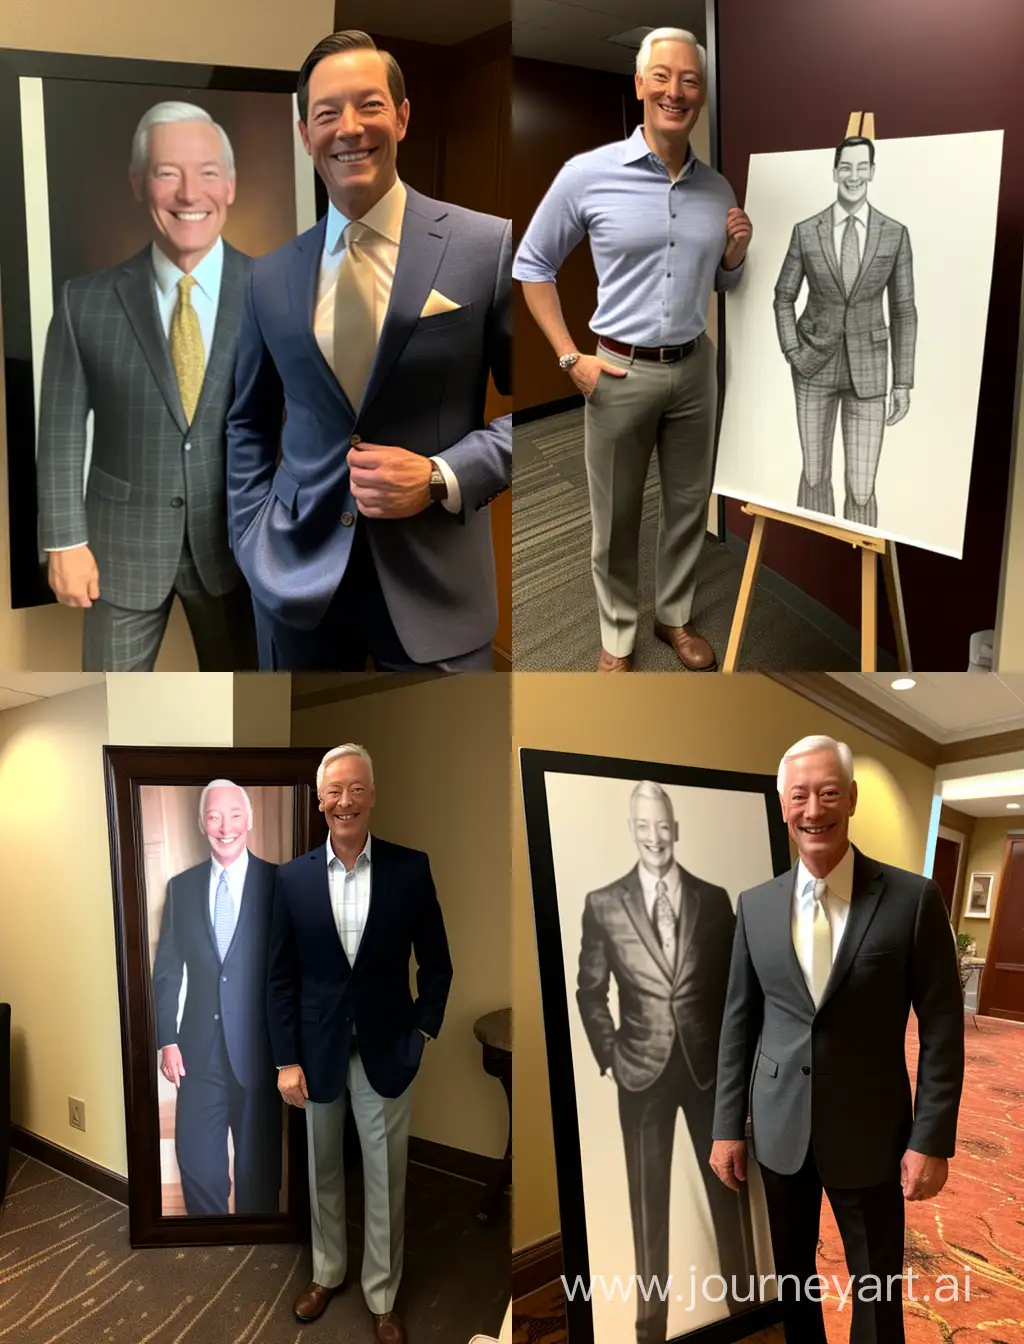 Brian-Tracy-Smiling-Alongside-a-Friend-in-Full-Body-View